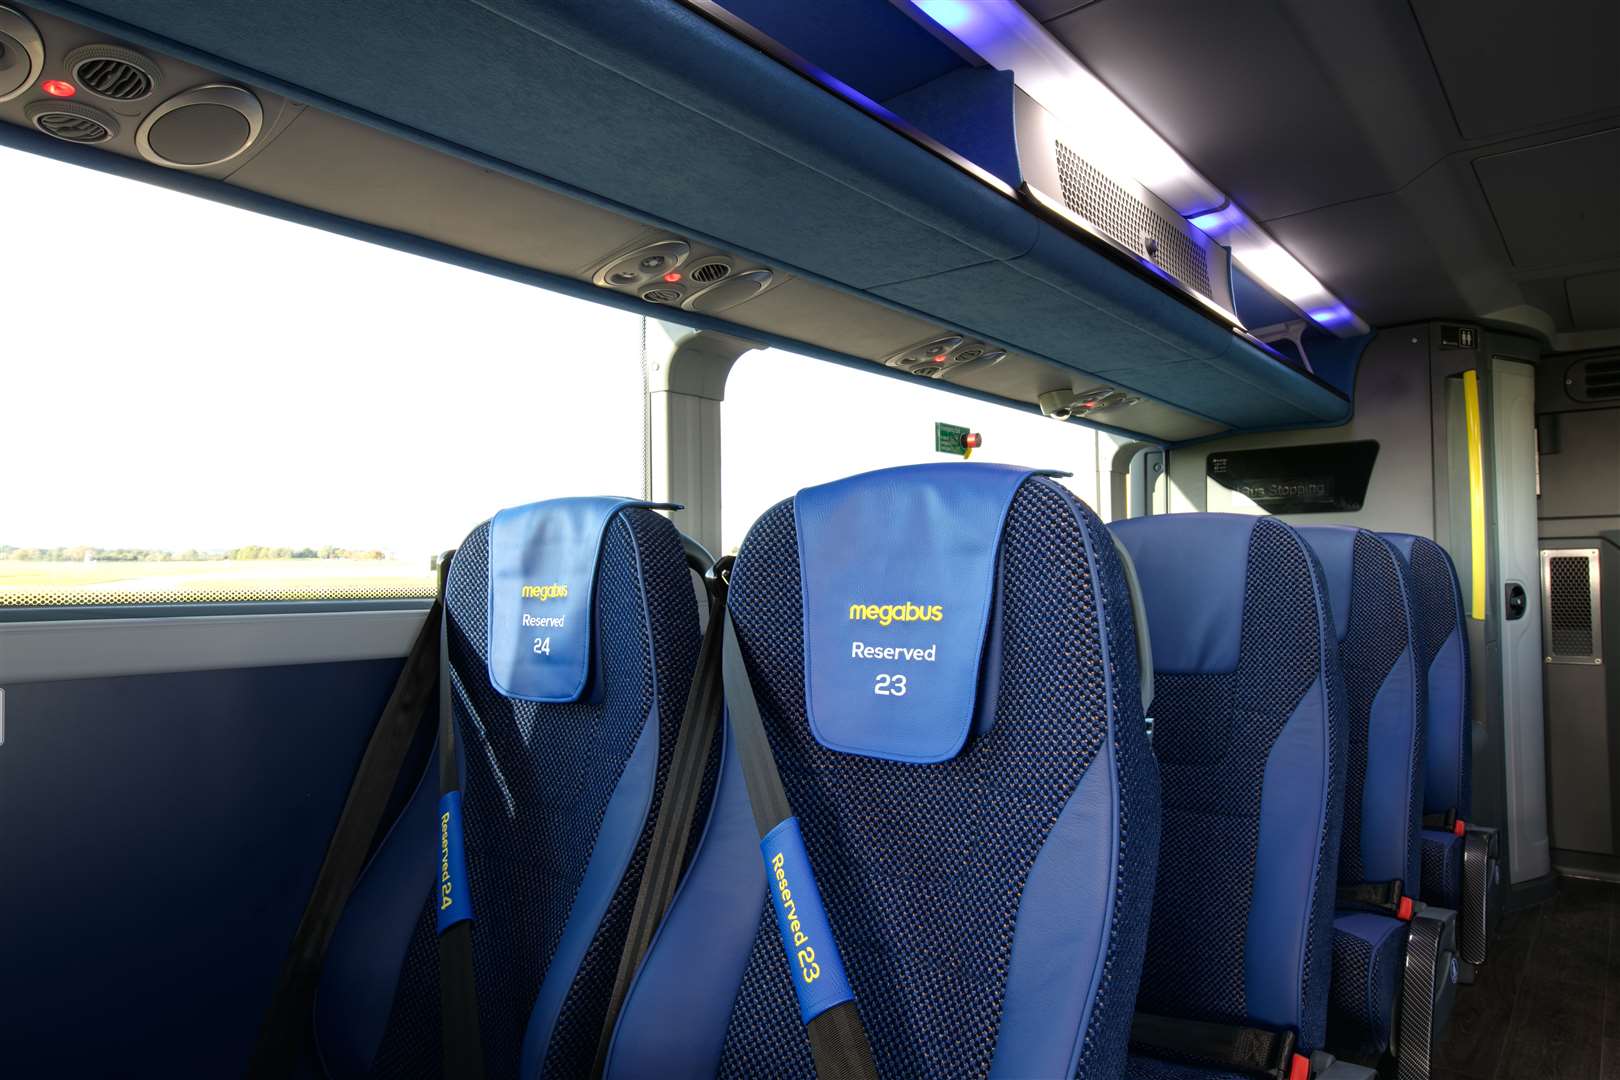 Megabus has launched a new bus service from Canterbury to Swansea in Wales. Picture: Megabus